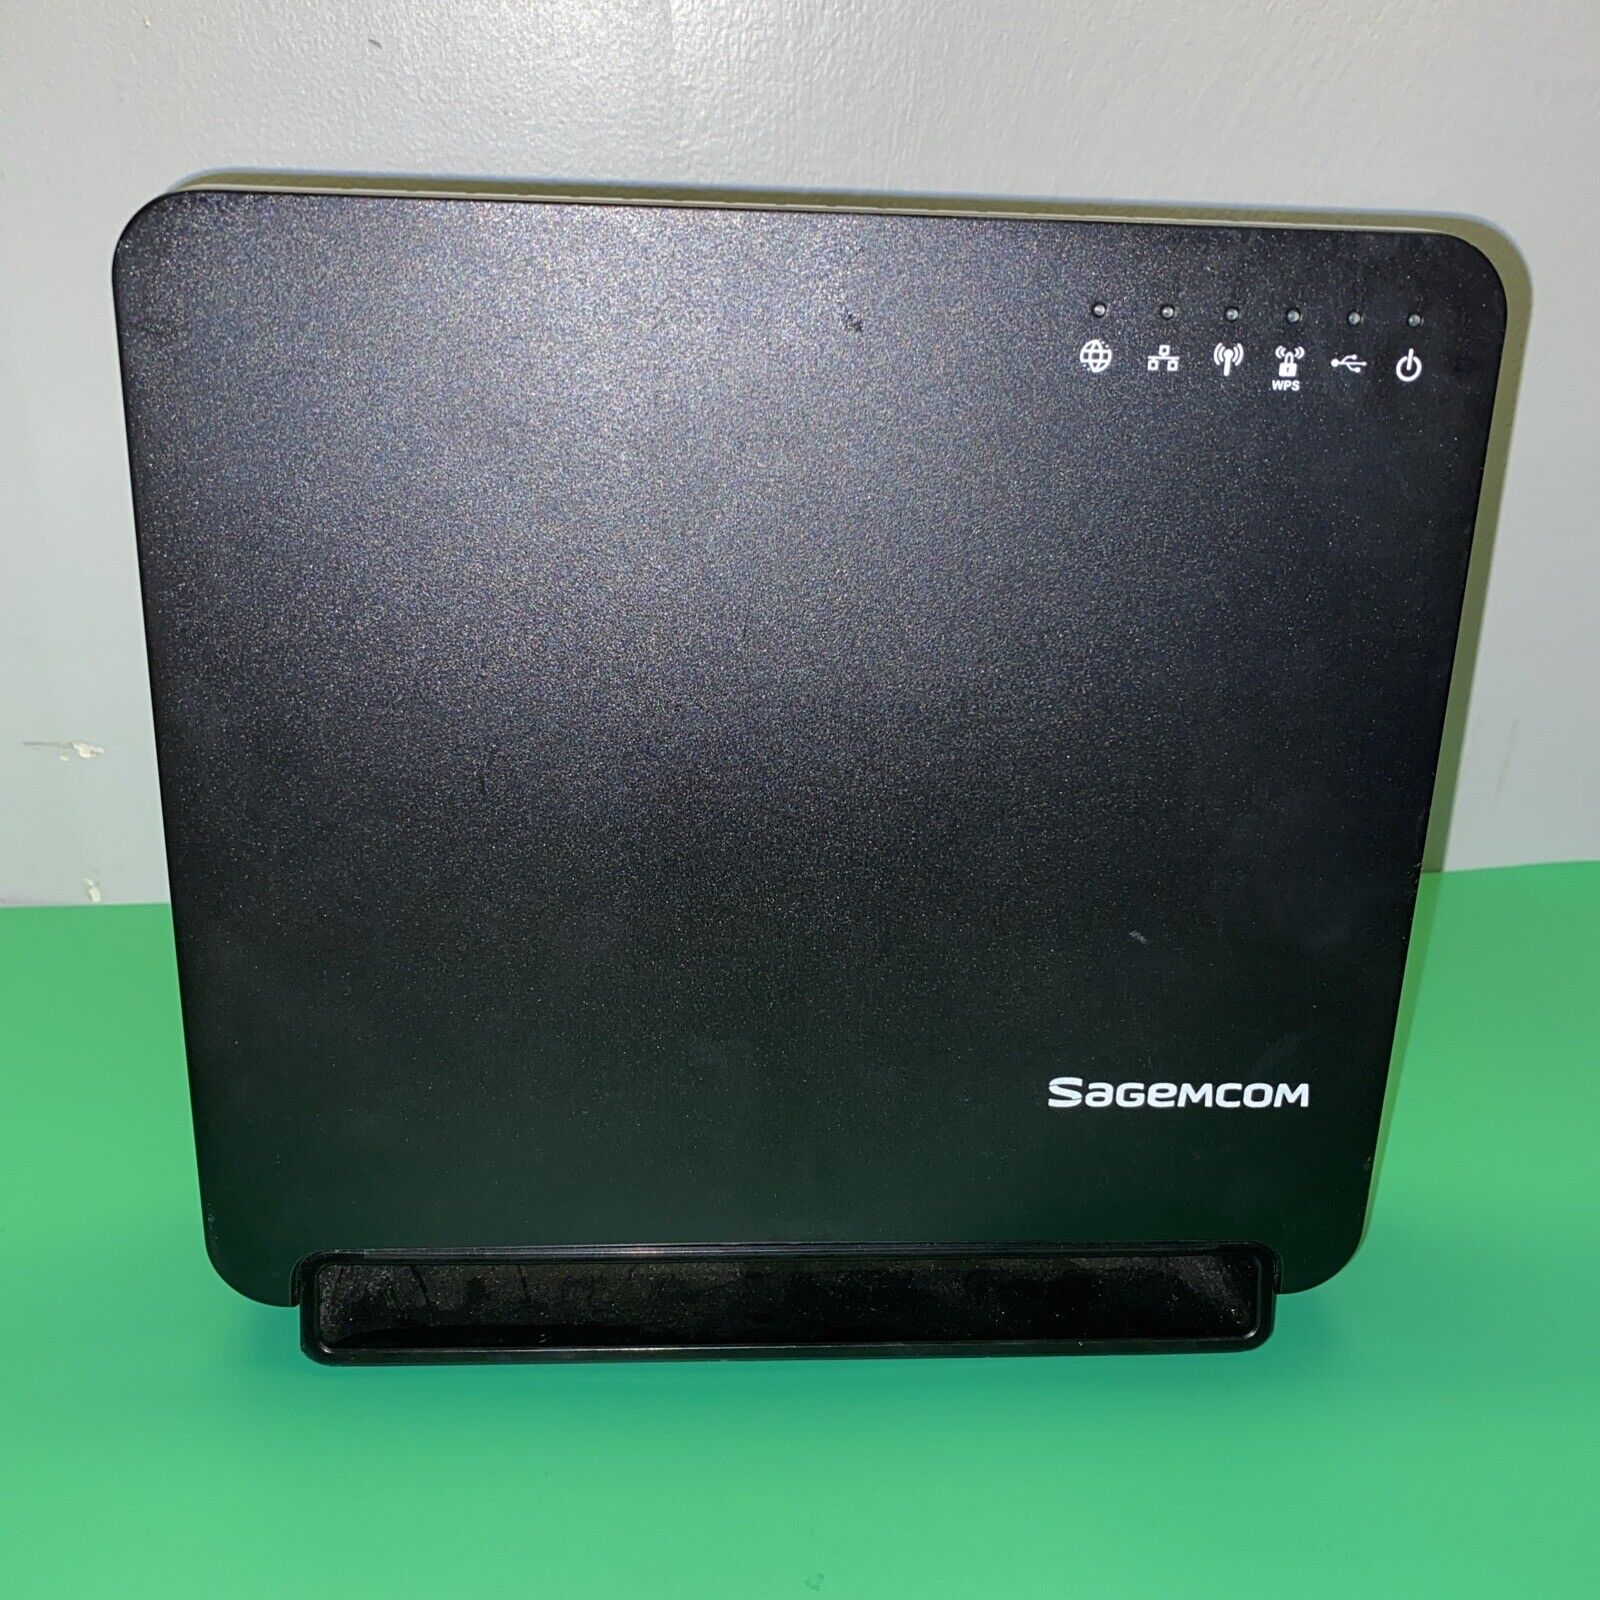 SAGEMCOM FAST 5260 DUAL-BAND WIRELESS WI-FI ROUTER. No Cords